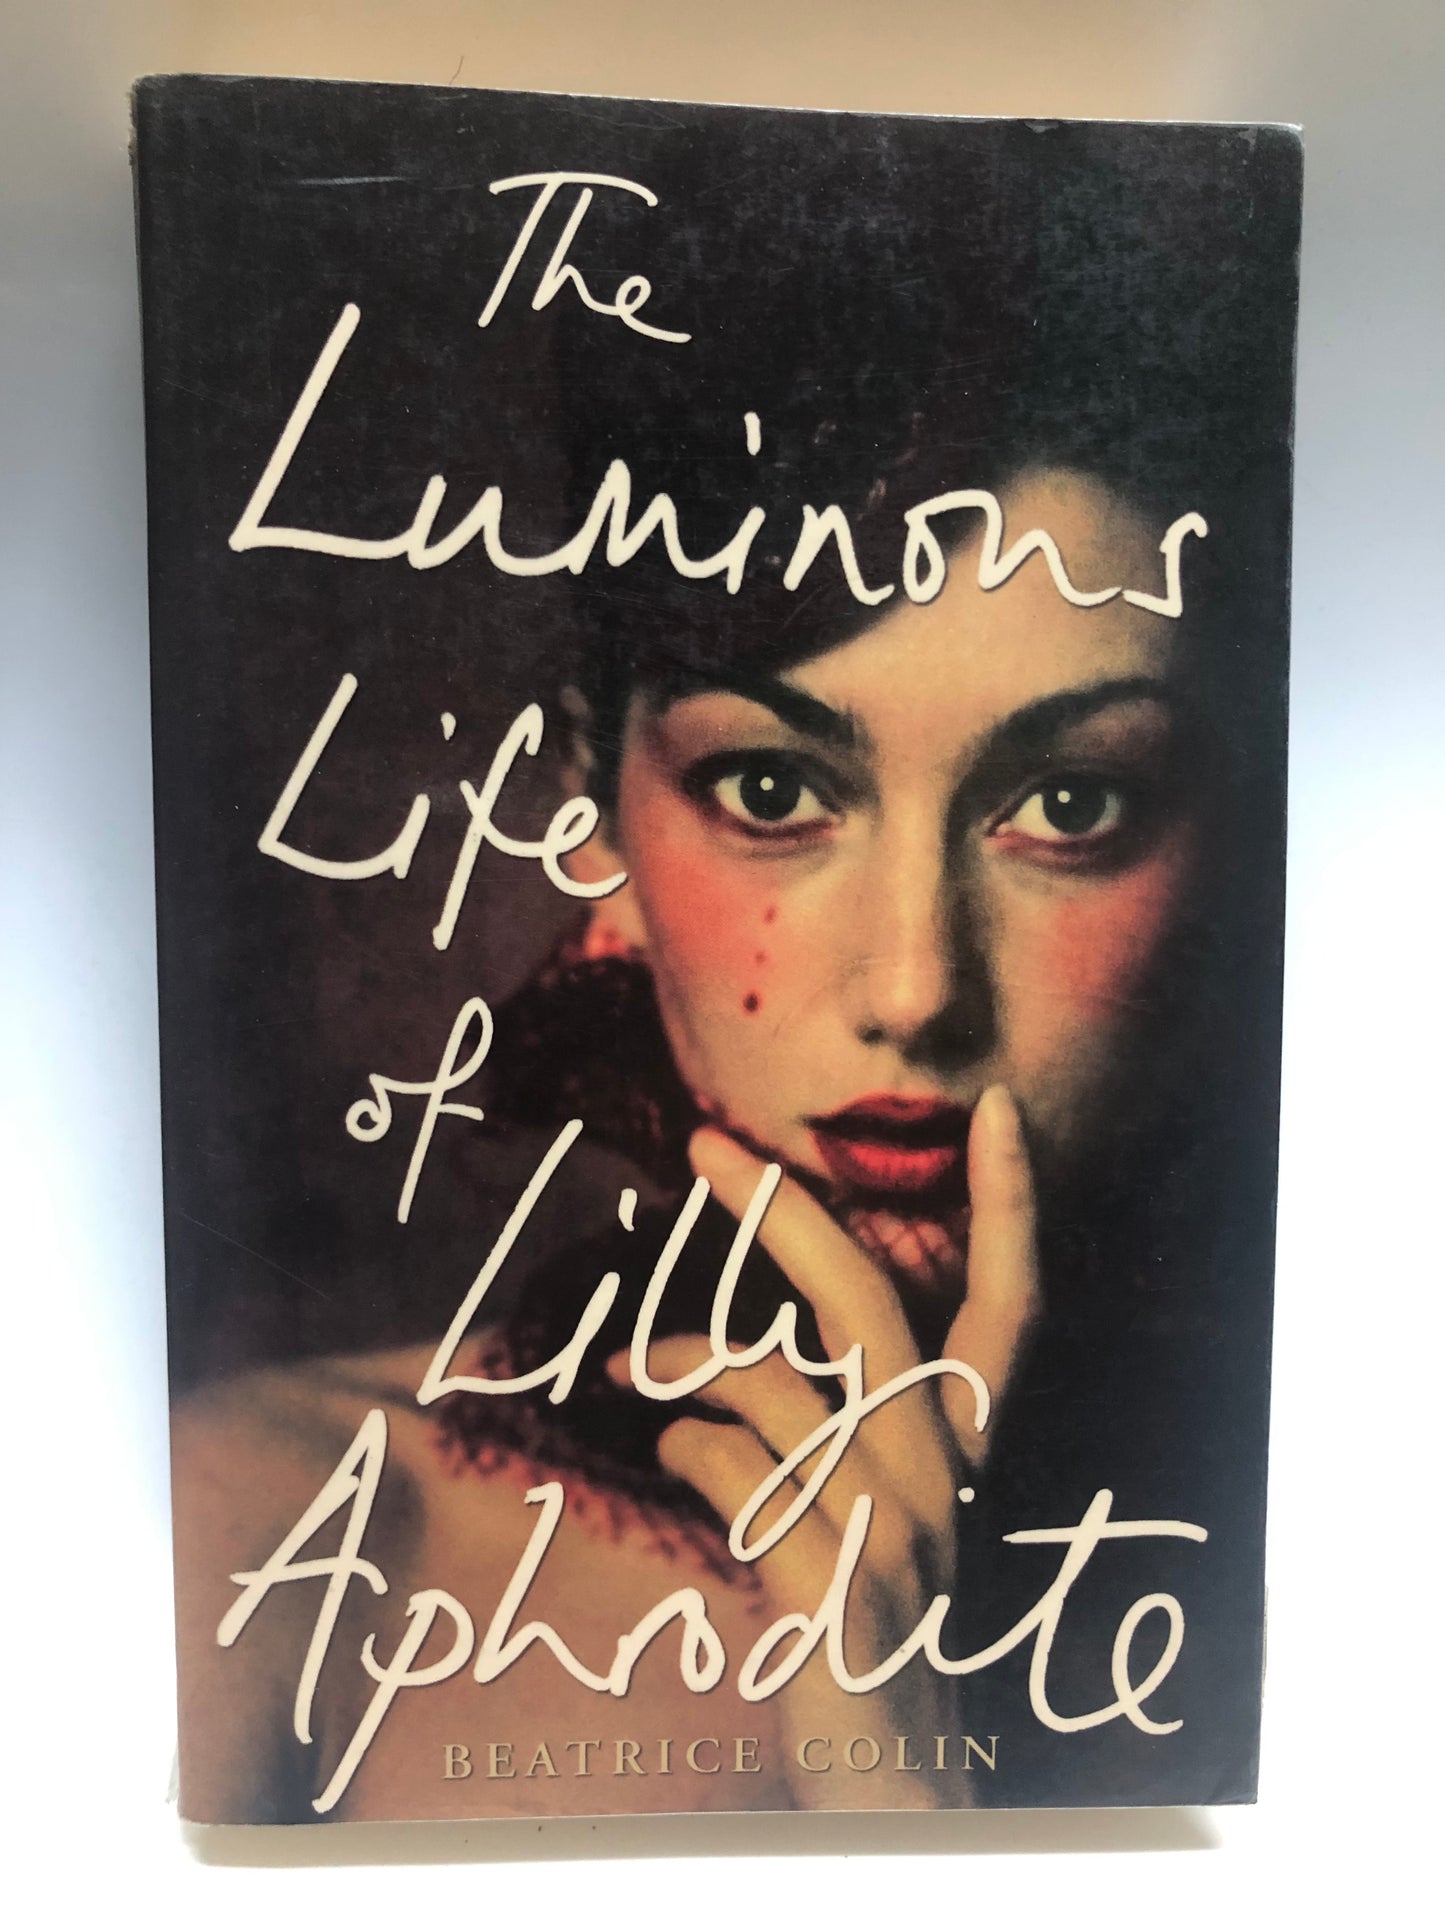 Colin, Beatrice - THE LUMINOUS LIFE OF LILLY APHRODITE